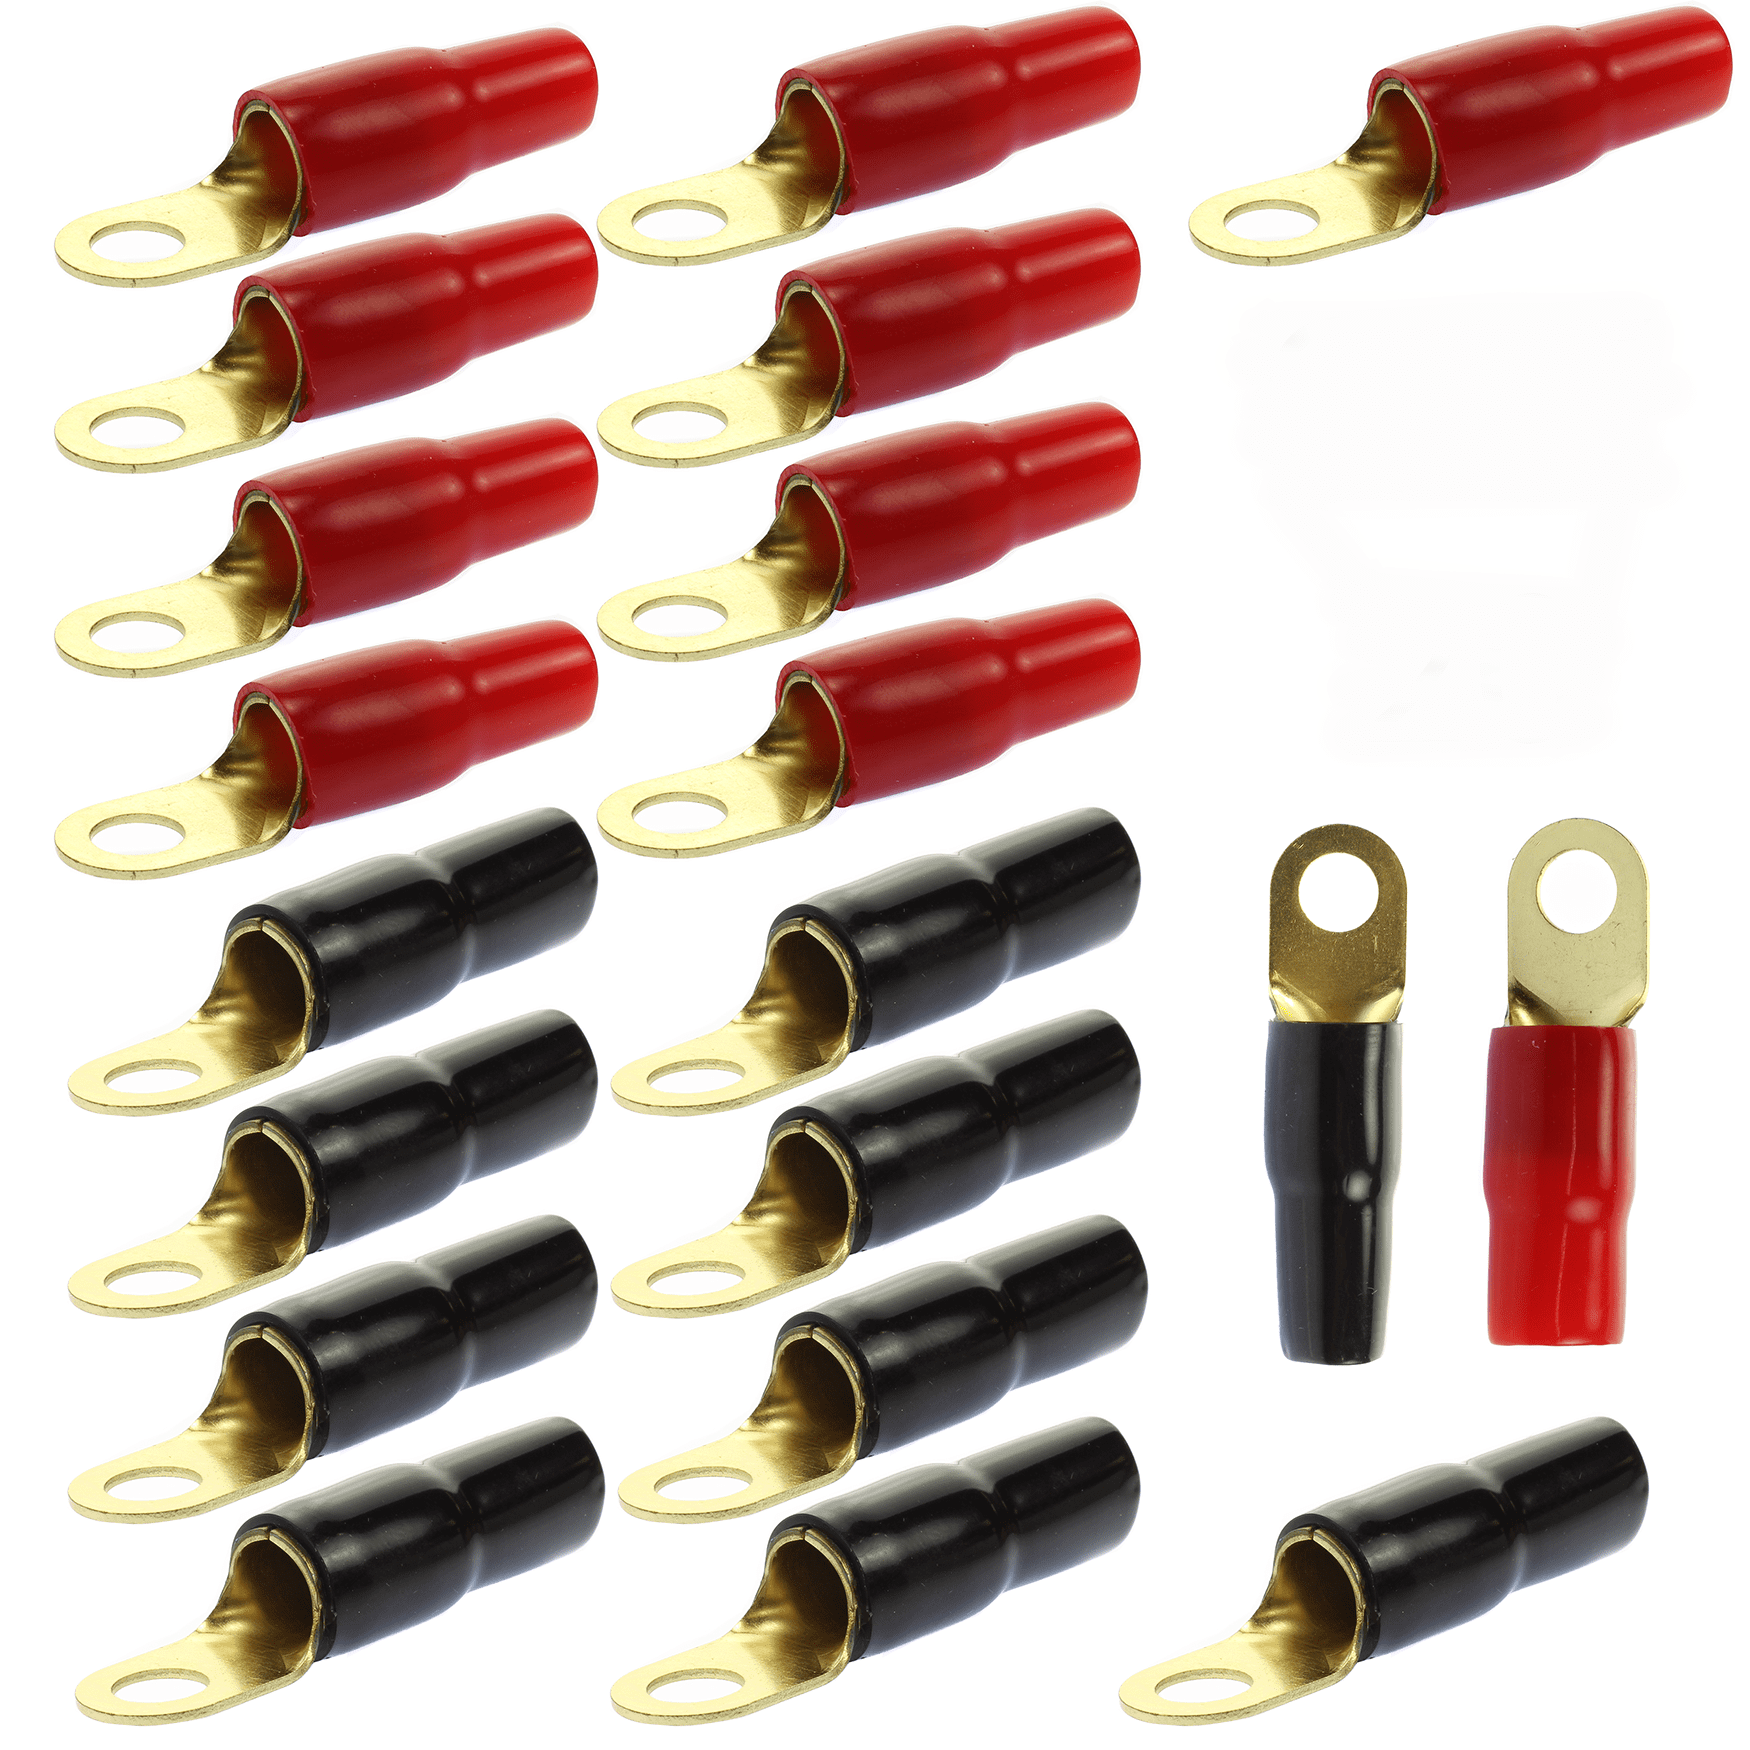 8 Gauge Gold Ring Terminal 40pc Pack Wire Crimp Cable Red Black Boots 5/16" Stud 